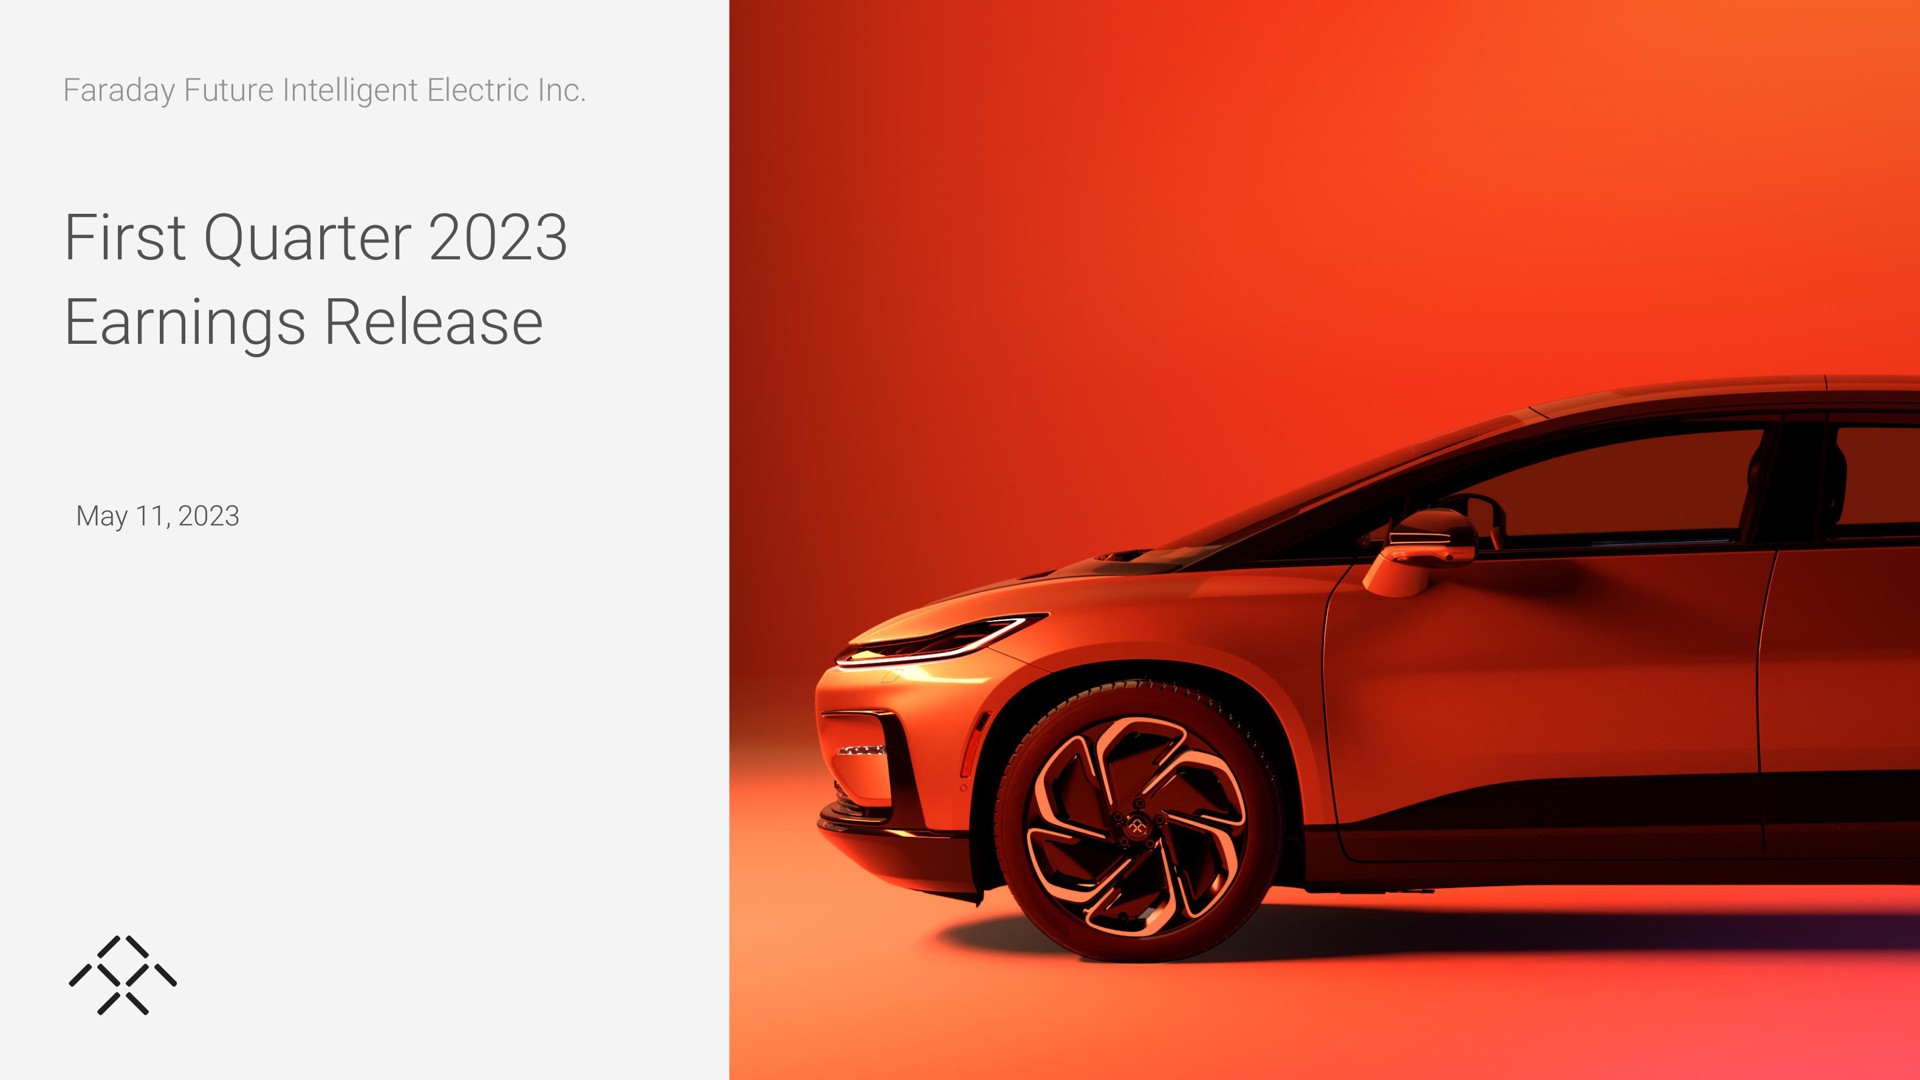 faraday future intelligent electric first quarter earnings release may | Faraday Future